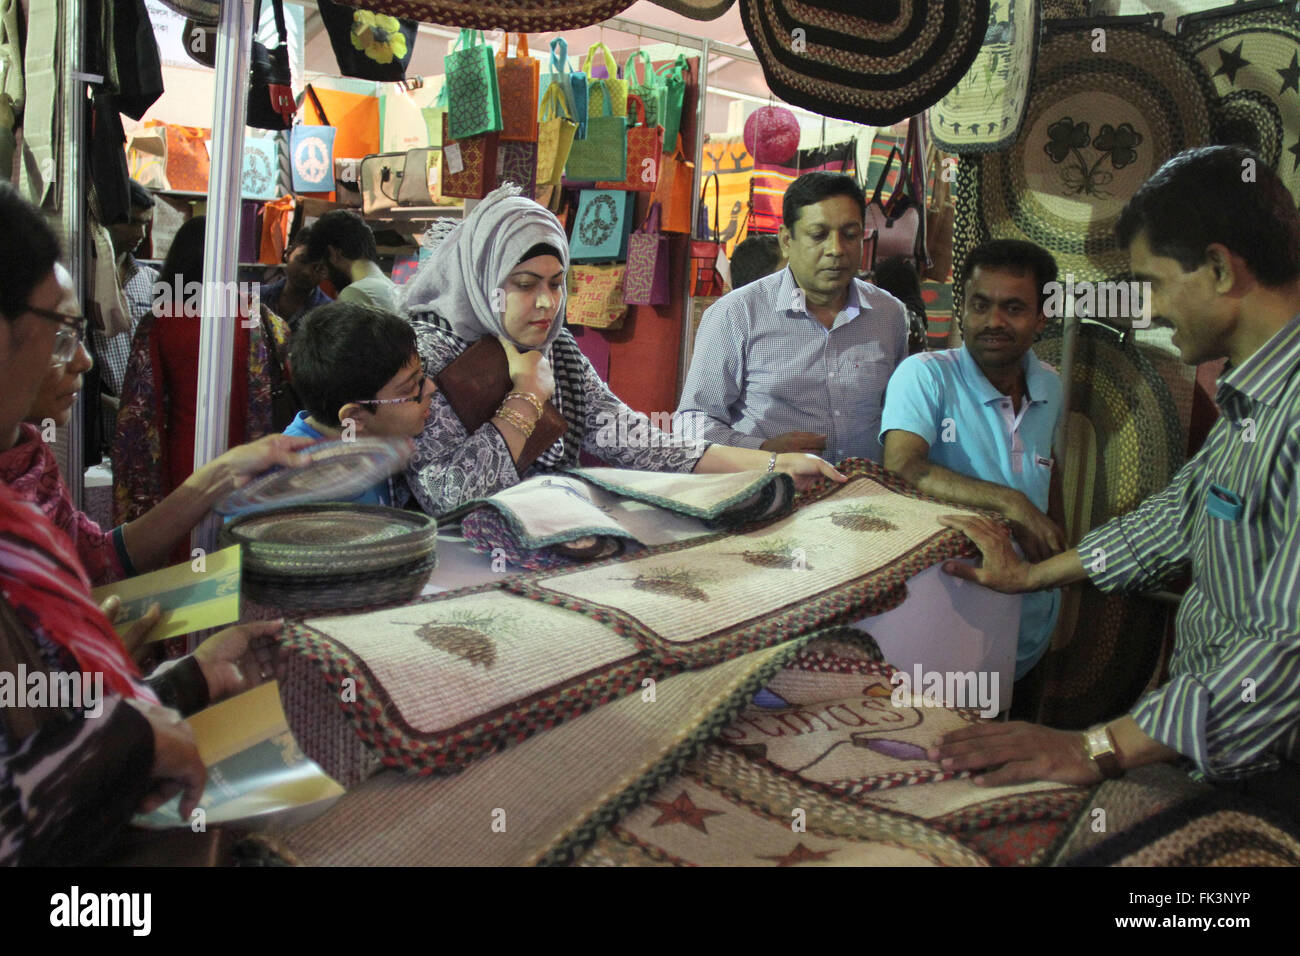 Dhaka, Bangladesh. 6th Mar, 2016. Visitors look at jute products at a stall during a three-day fair at Bangabandhu International Conference Center in Dhaka, Bangladesh, March 6, 2016. A three-day fair on diversification of jute products began in Dhaka on Sunday to promote jute and jute products in the world market. © Shariful Islam/Xinhua/Alamy Live News Stock Photo